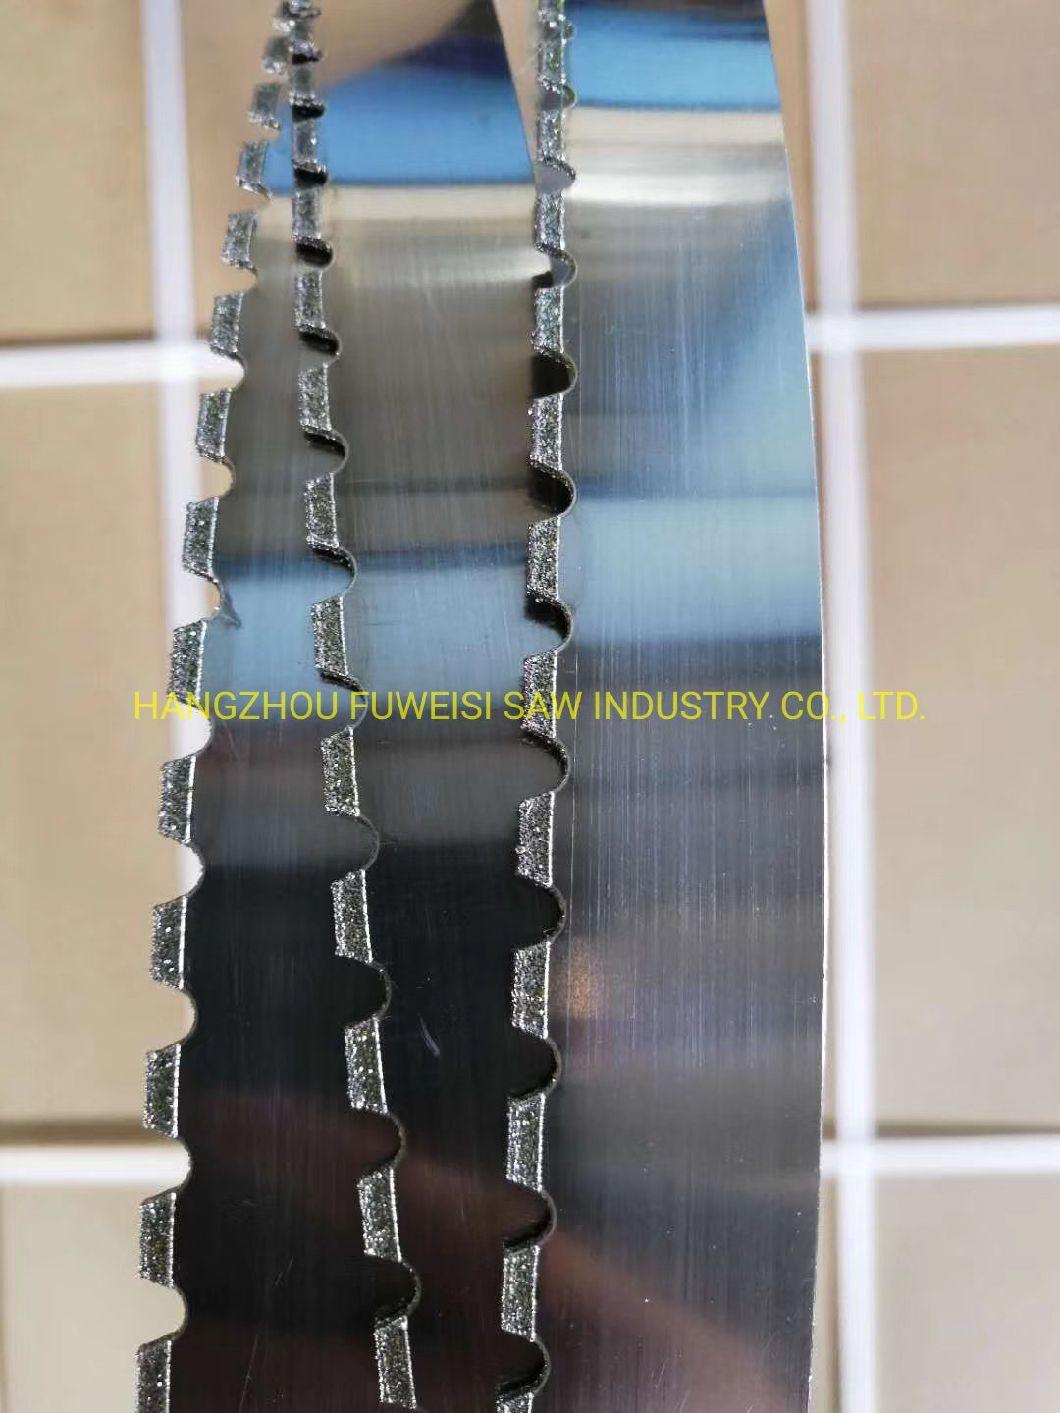 Best Quality Diamond Band Saw Blade From Factory